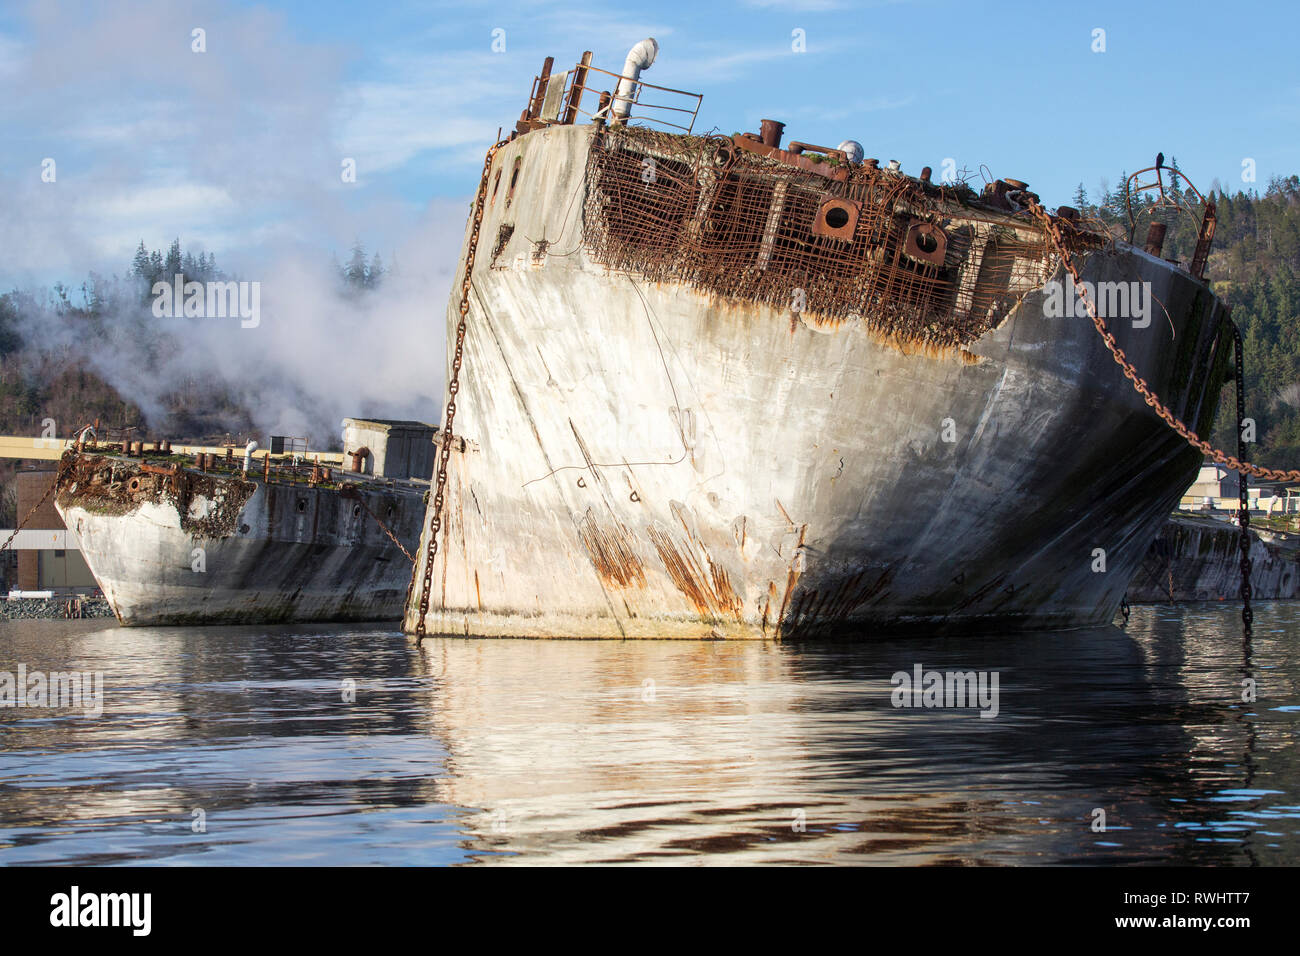 A concrete barge, used as a breakwater for Catalyst Paper's Mill in Powell River, British Columbia, Canada Stock Photo